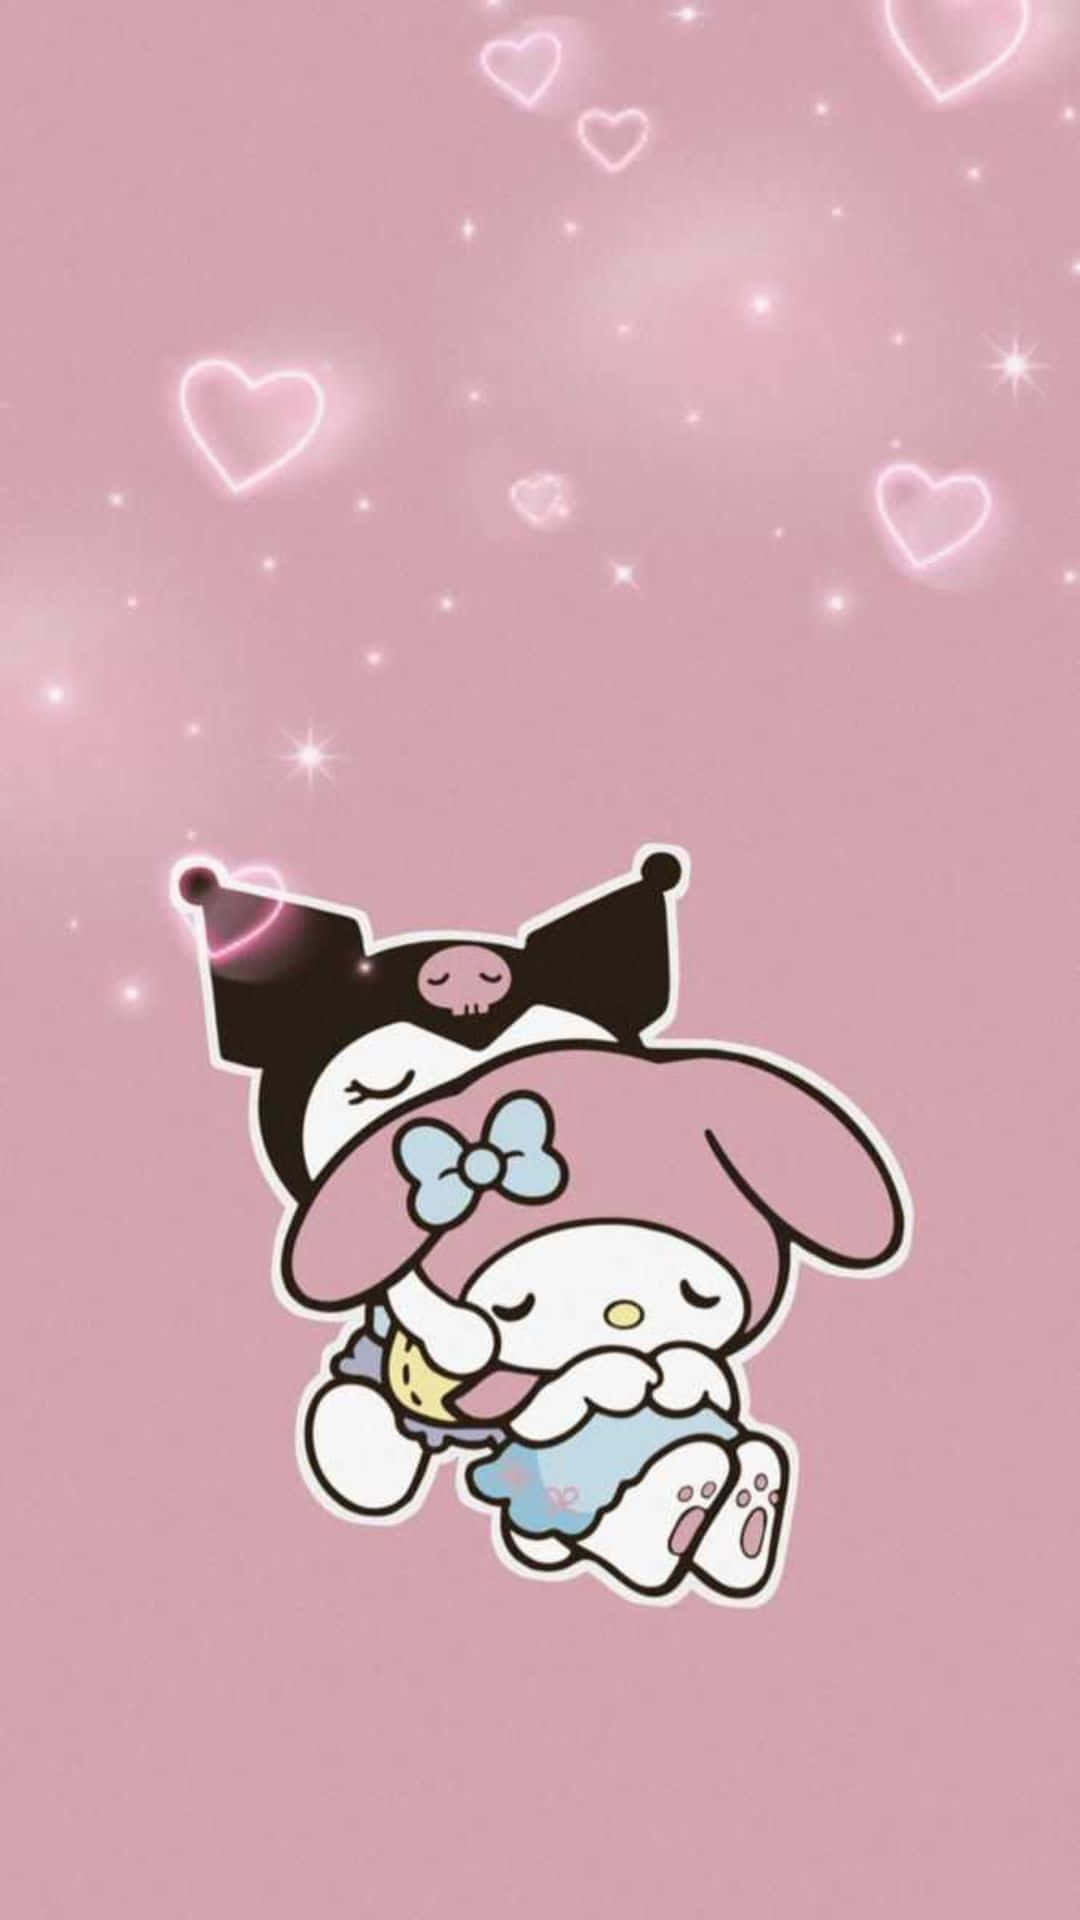 Kuromi and My Melody Unite in a Cute and Colorful Adventure Wallpaper